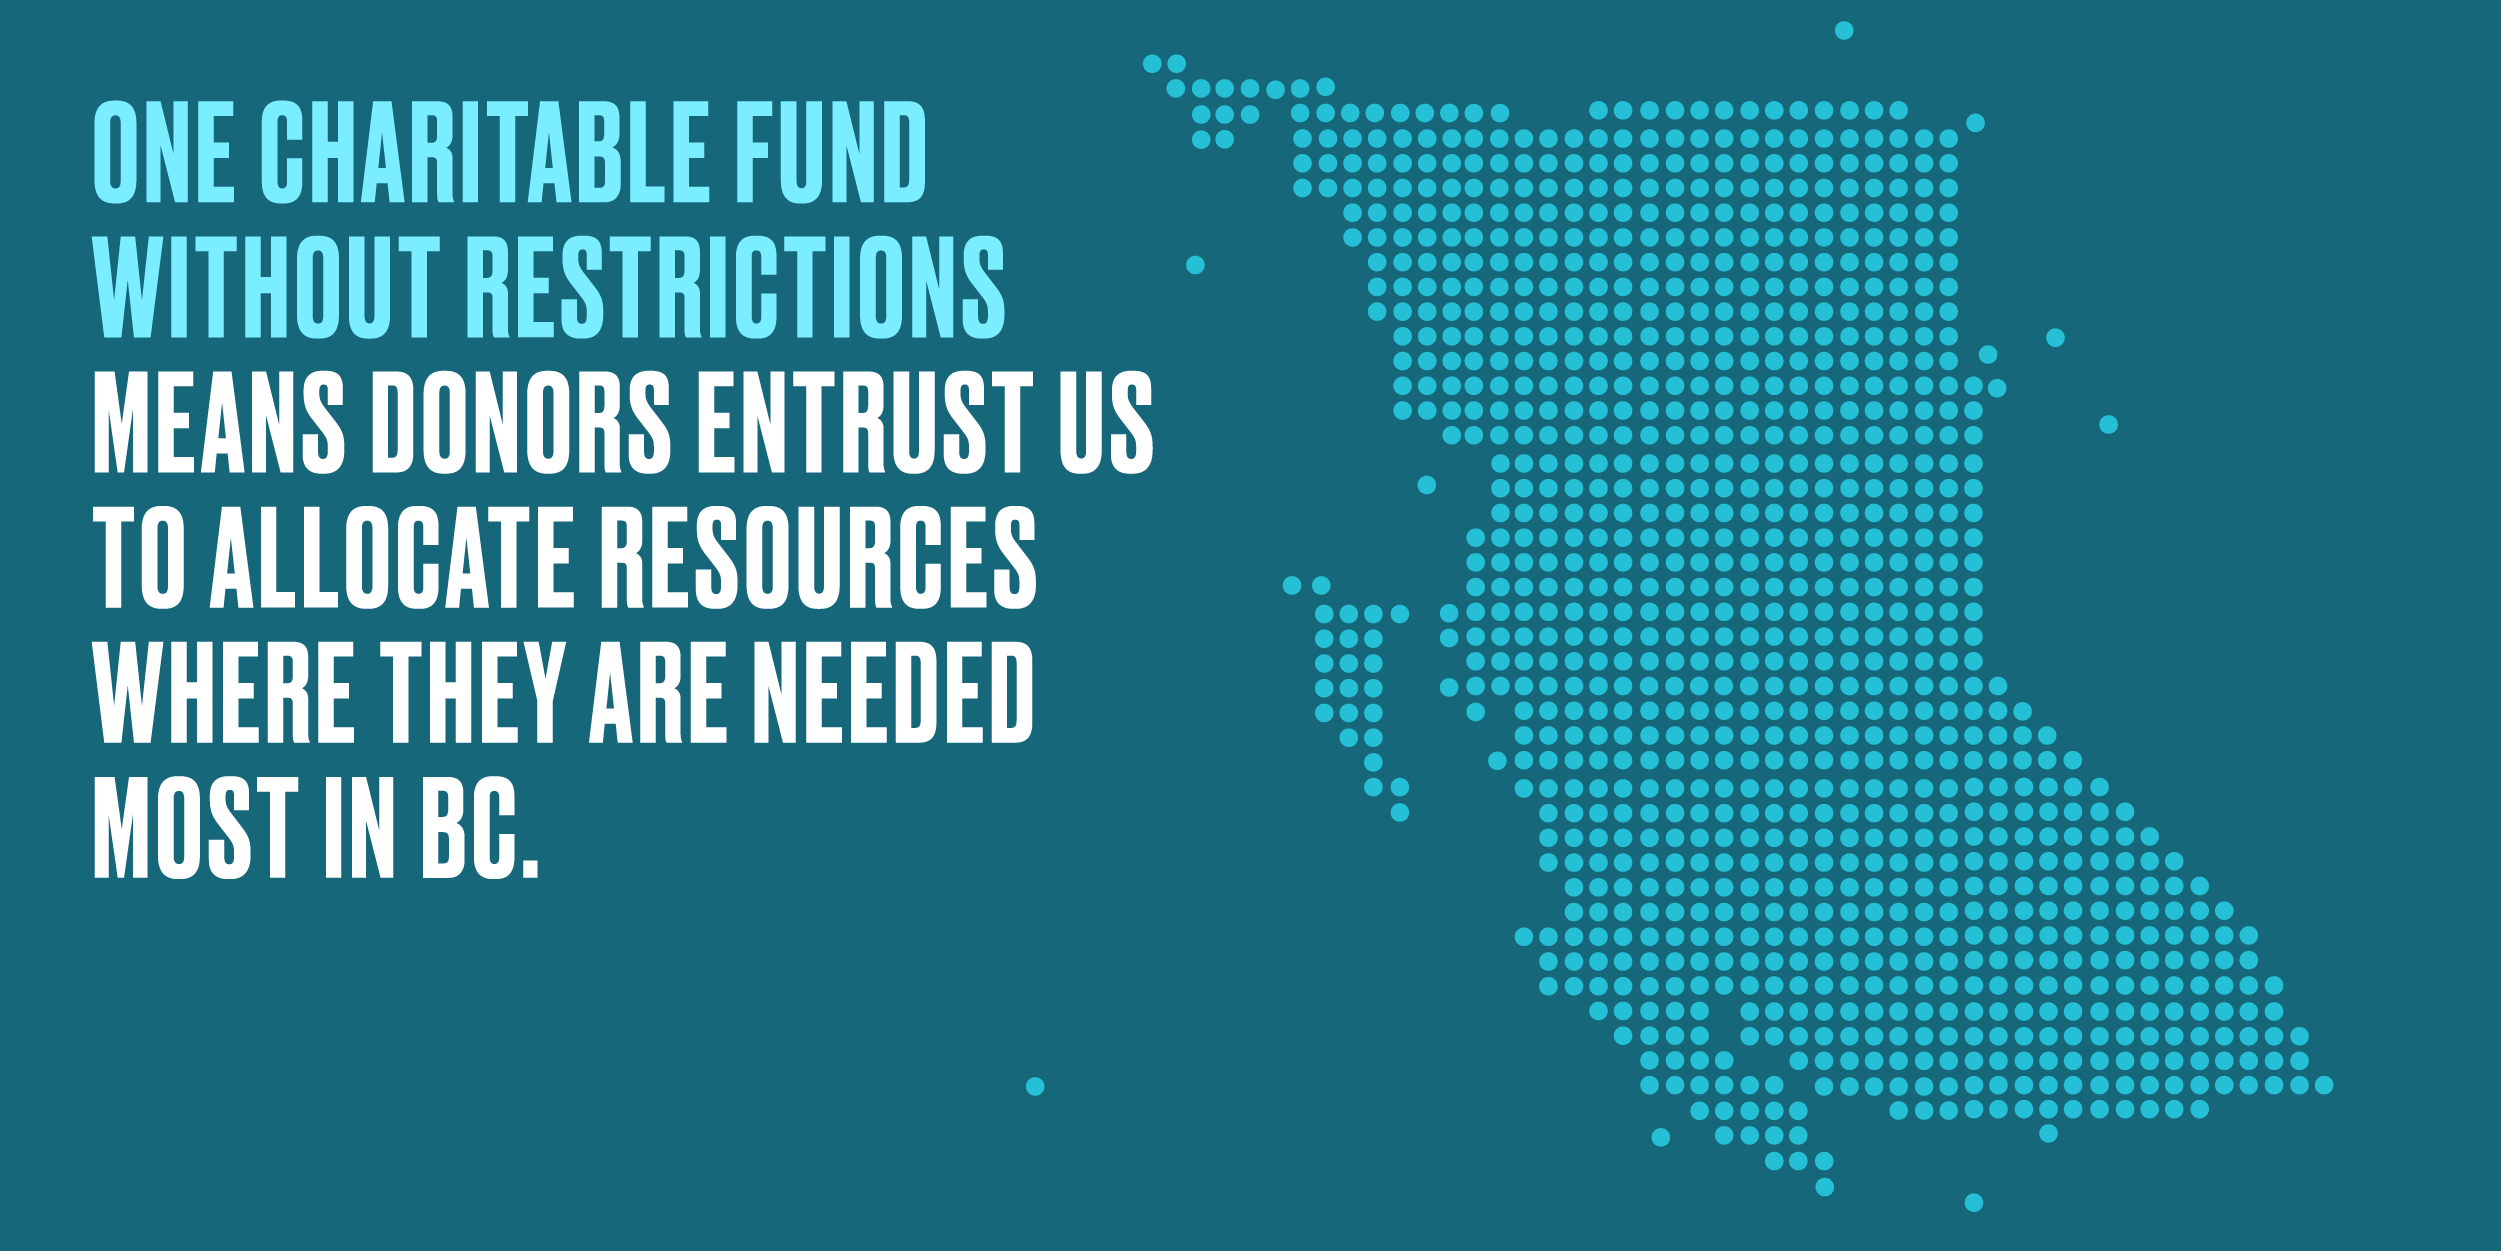 A map of BC with a text on the right side that reads: "one charitable fund without restrictions means donors entrust us to allocate resources where they are needed most in BC."